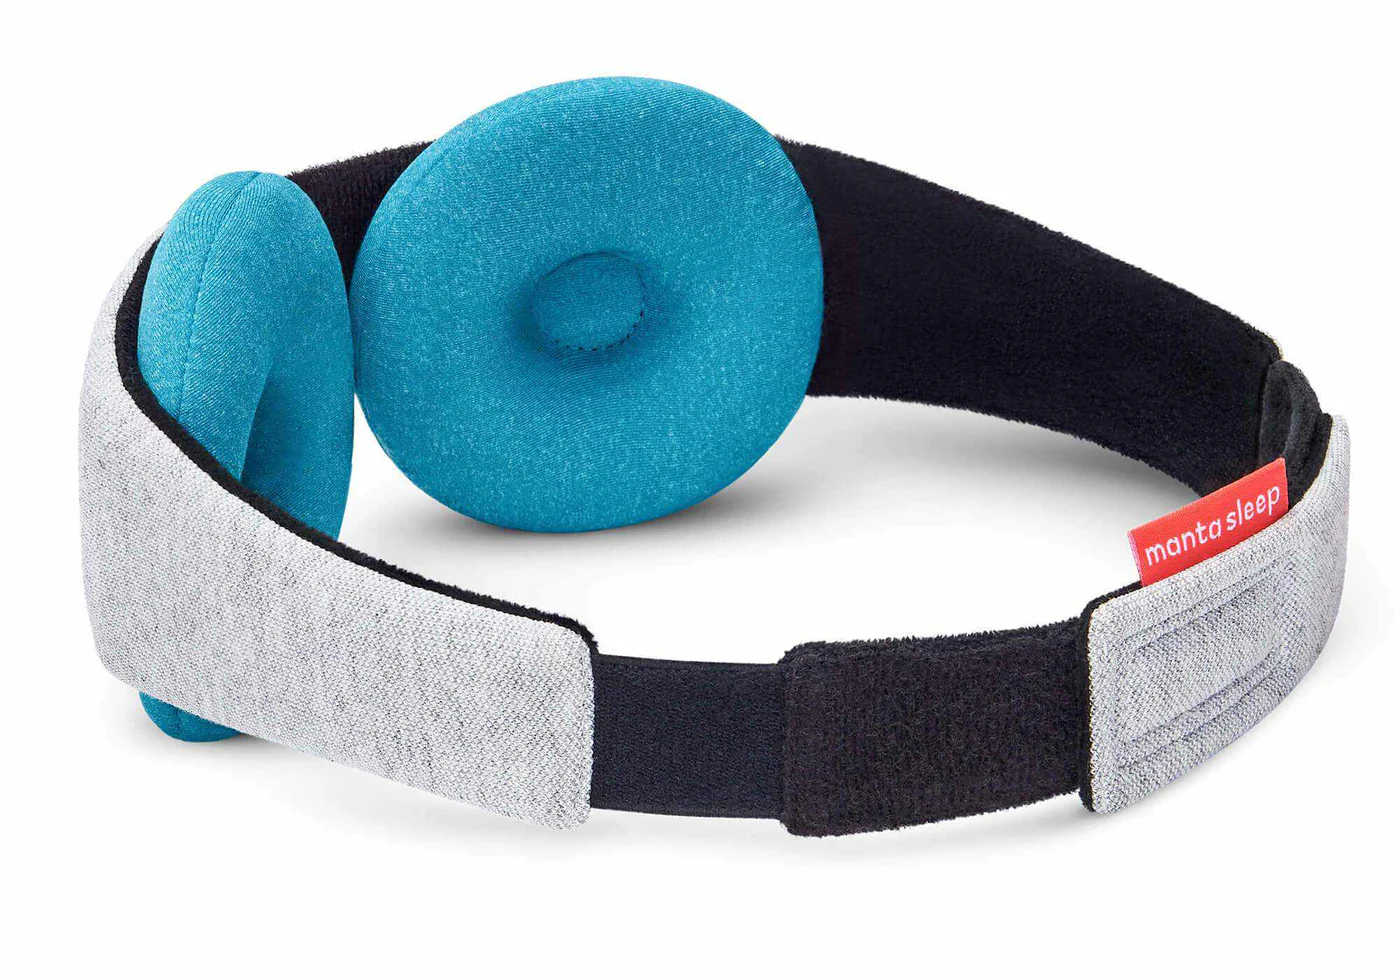 The back side of a sleep mask with a micro hook-and-loop closure and 2 blue cooling eye cups attached to the black interior.